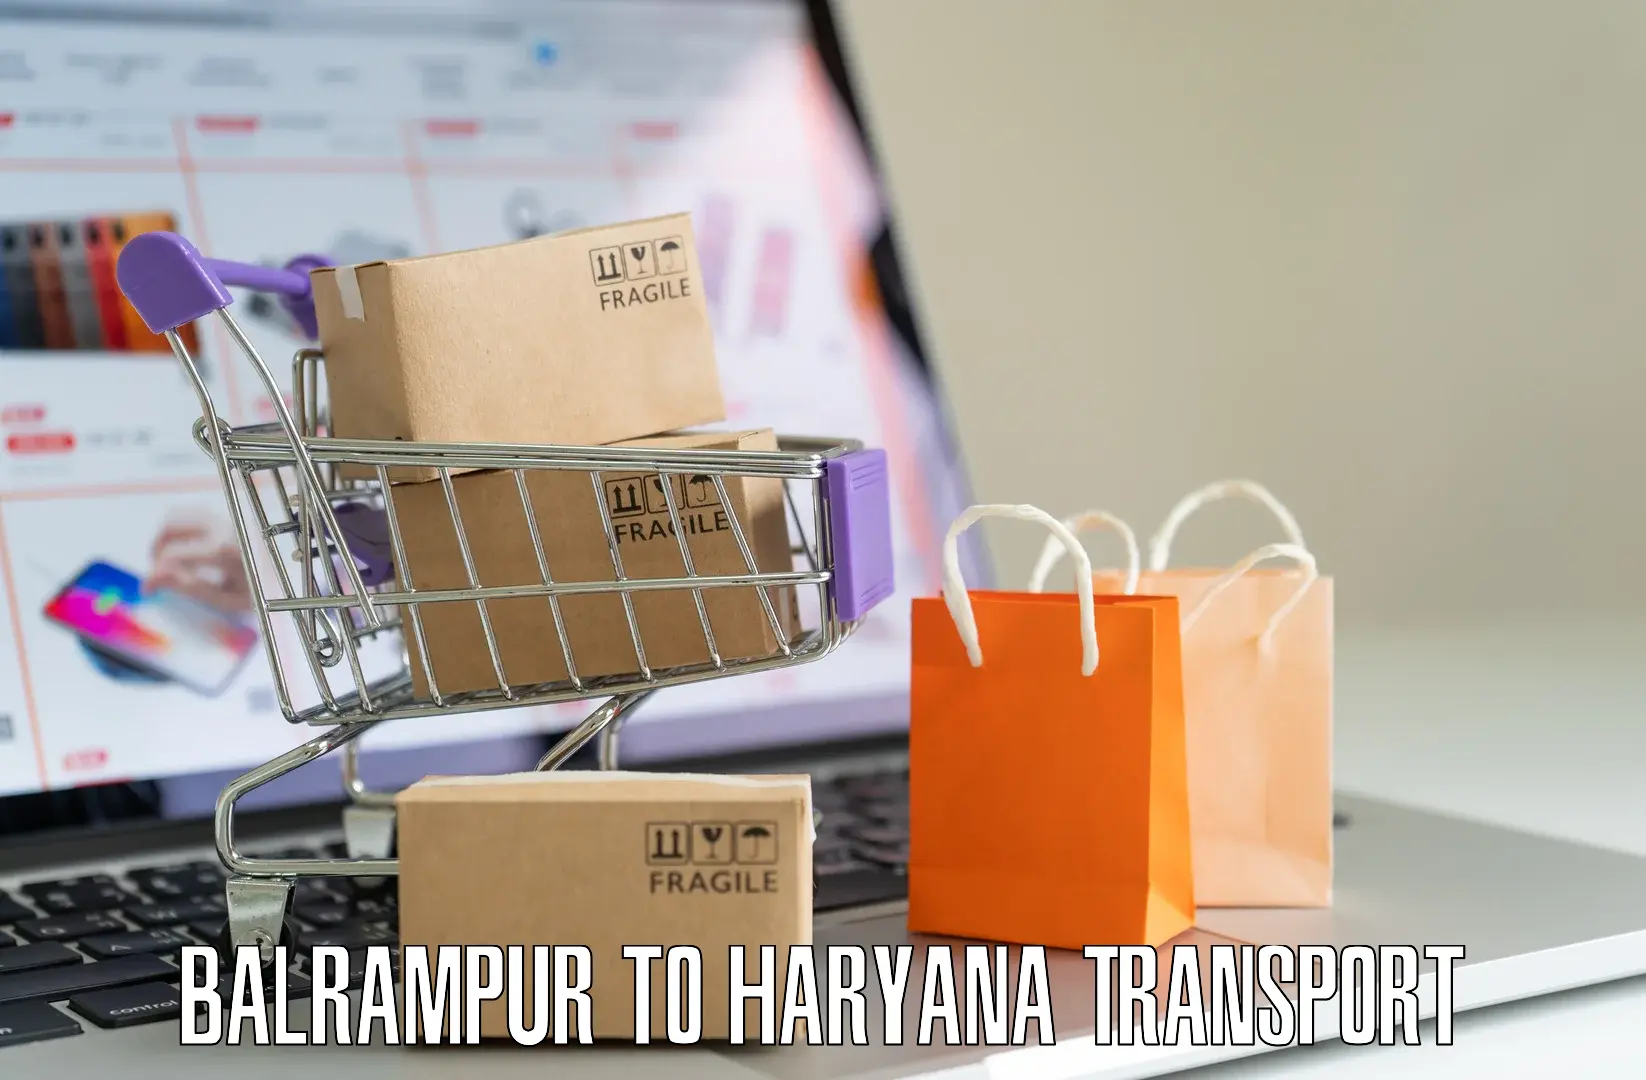 Nationwide transport services Balrampur to Bhiwani